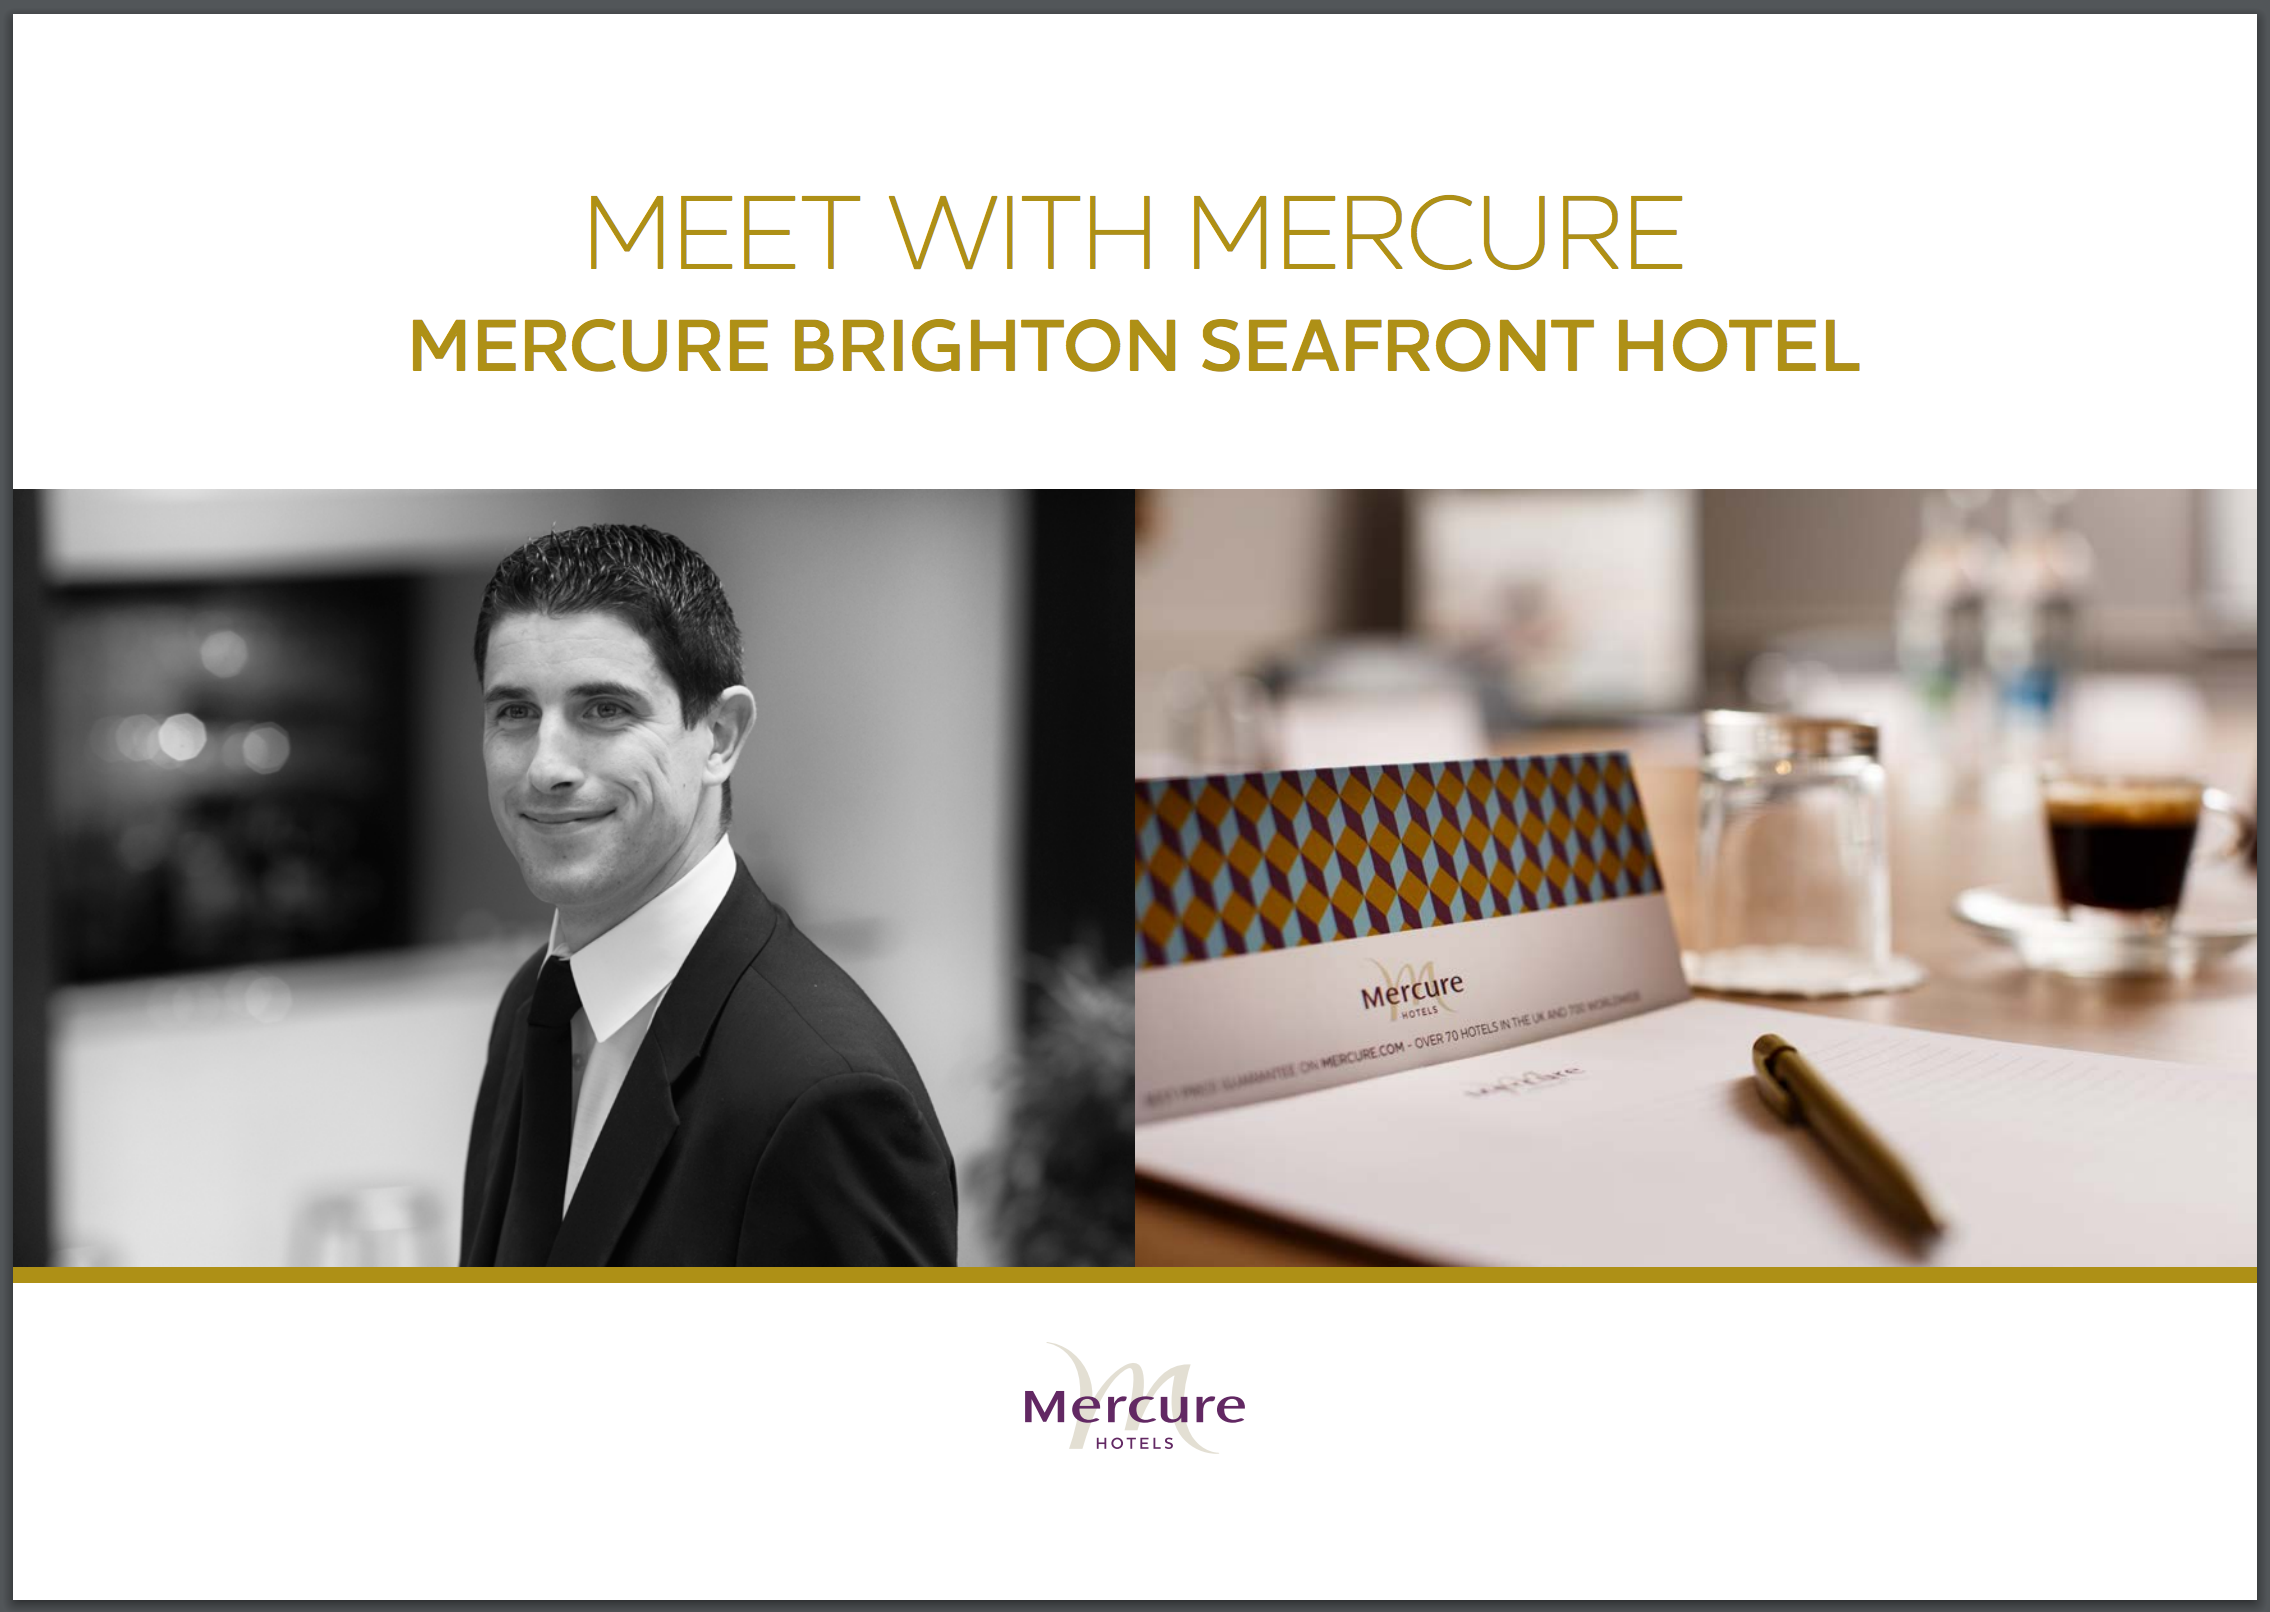 Mercure Brighton Seafront Hotel Meeting Brochure Cover